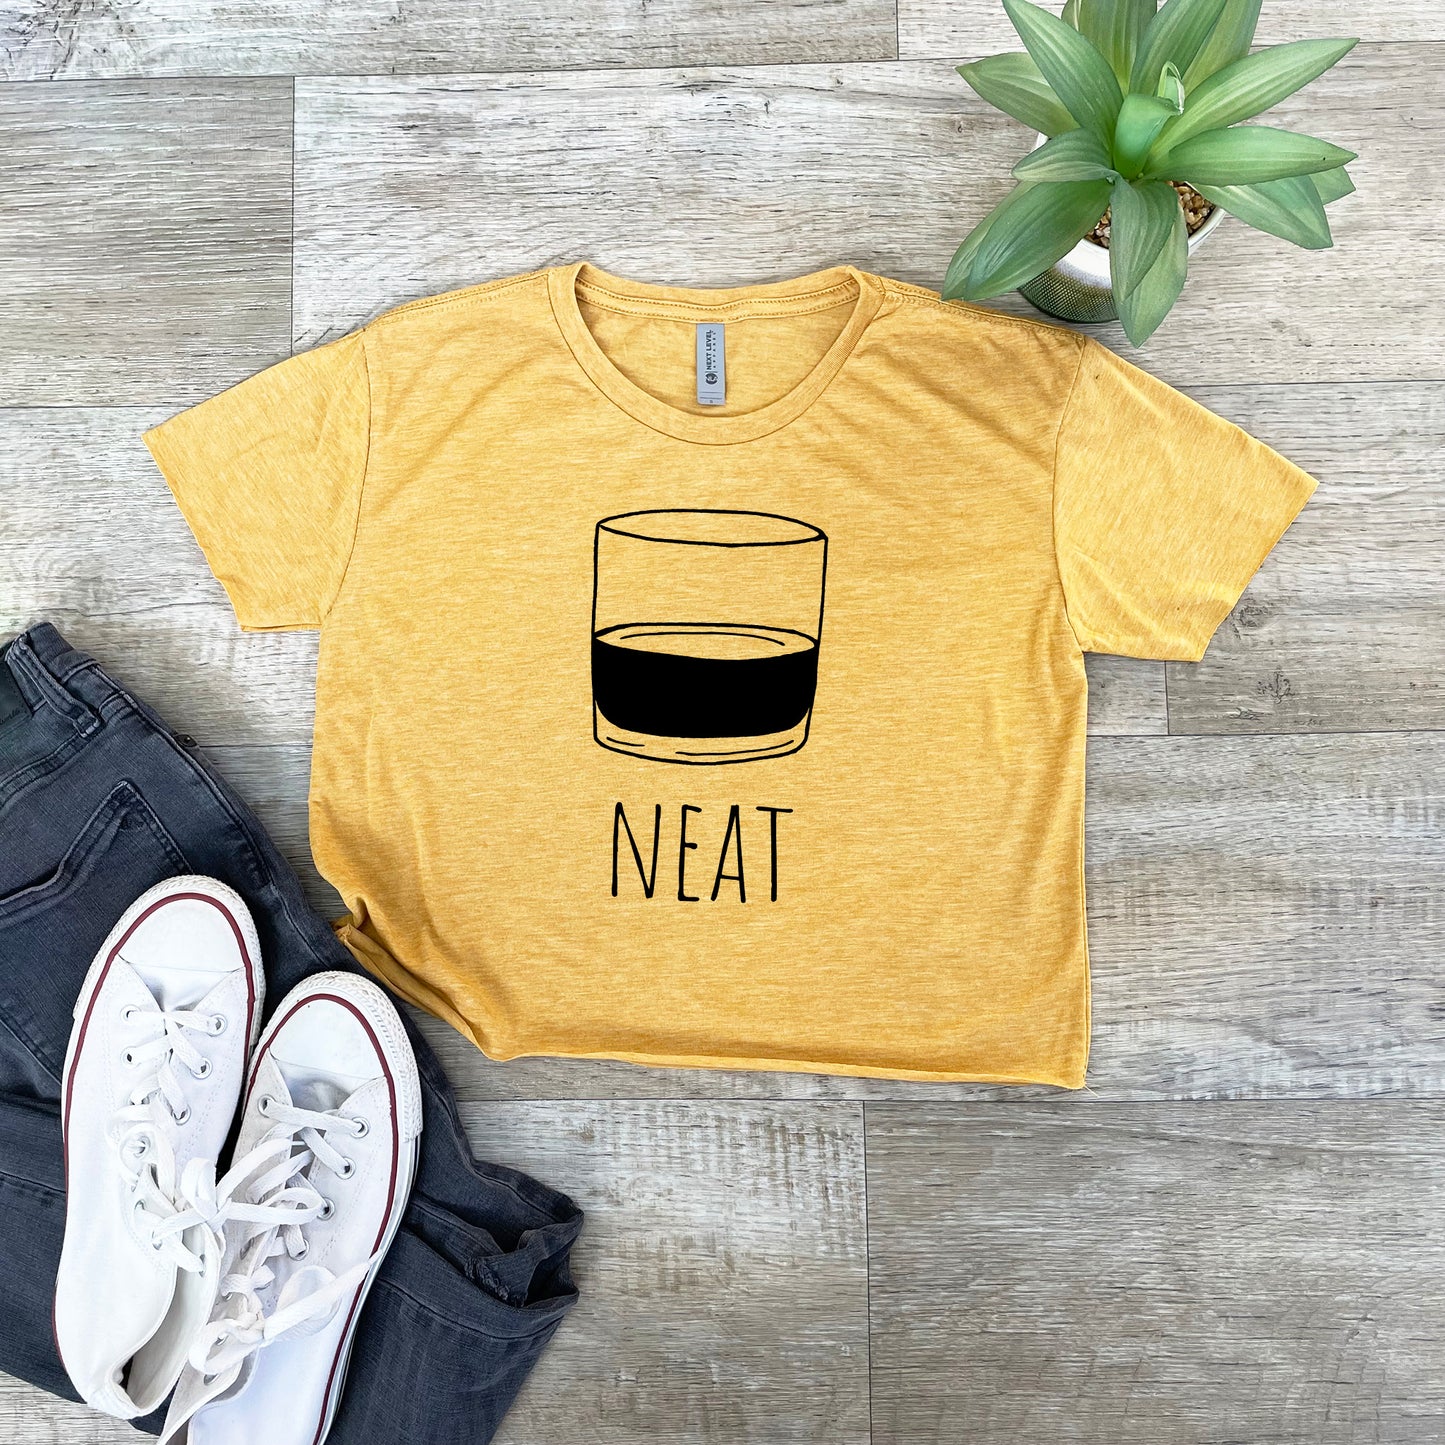 Neat (Whiskey) - Women's Crop Tee - Heather Gray or Gold